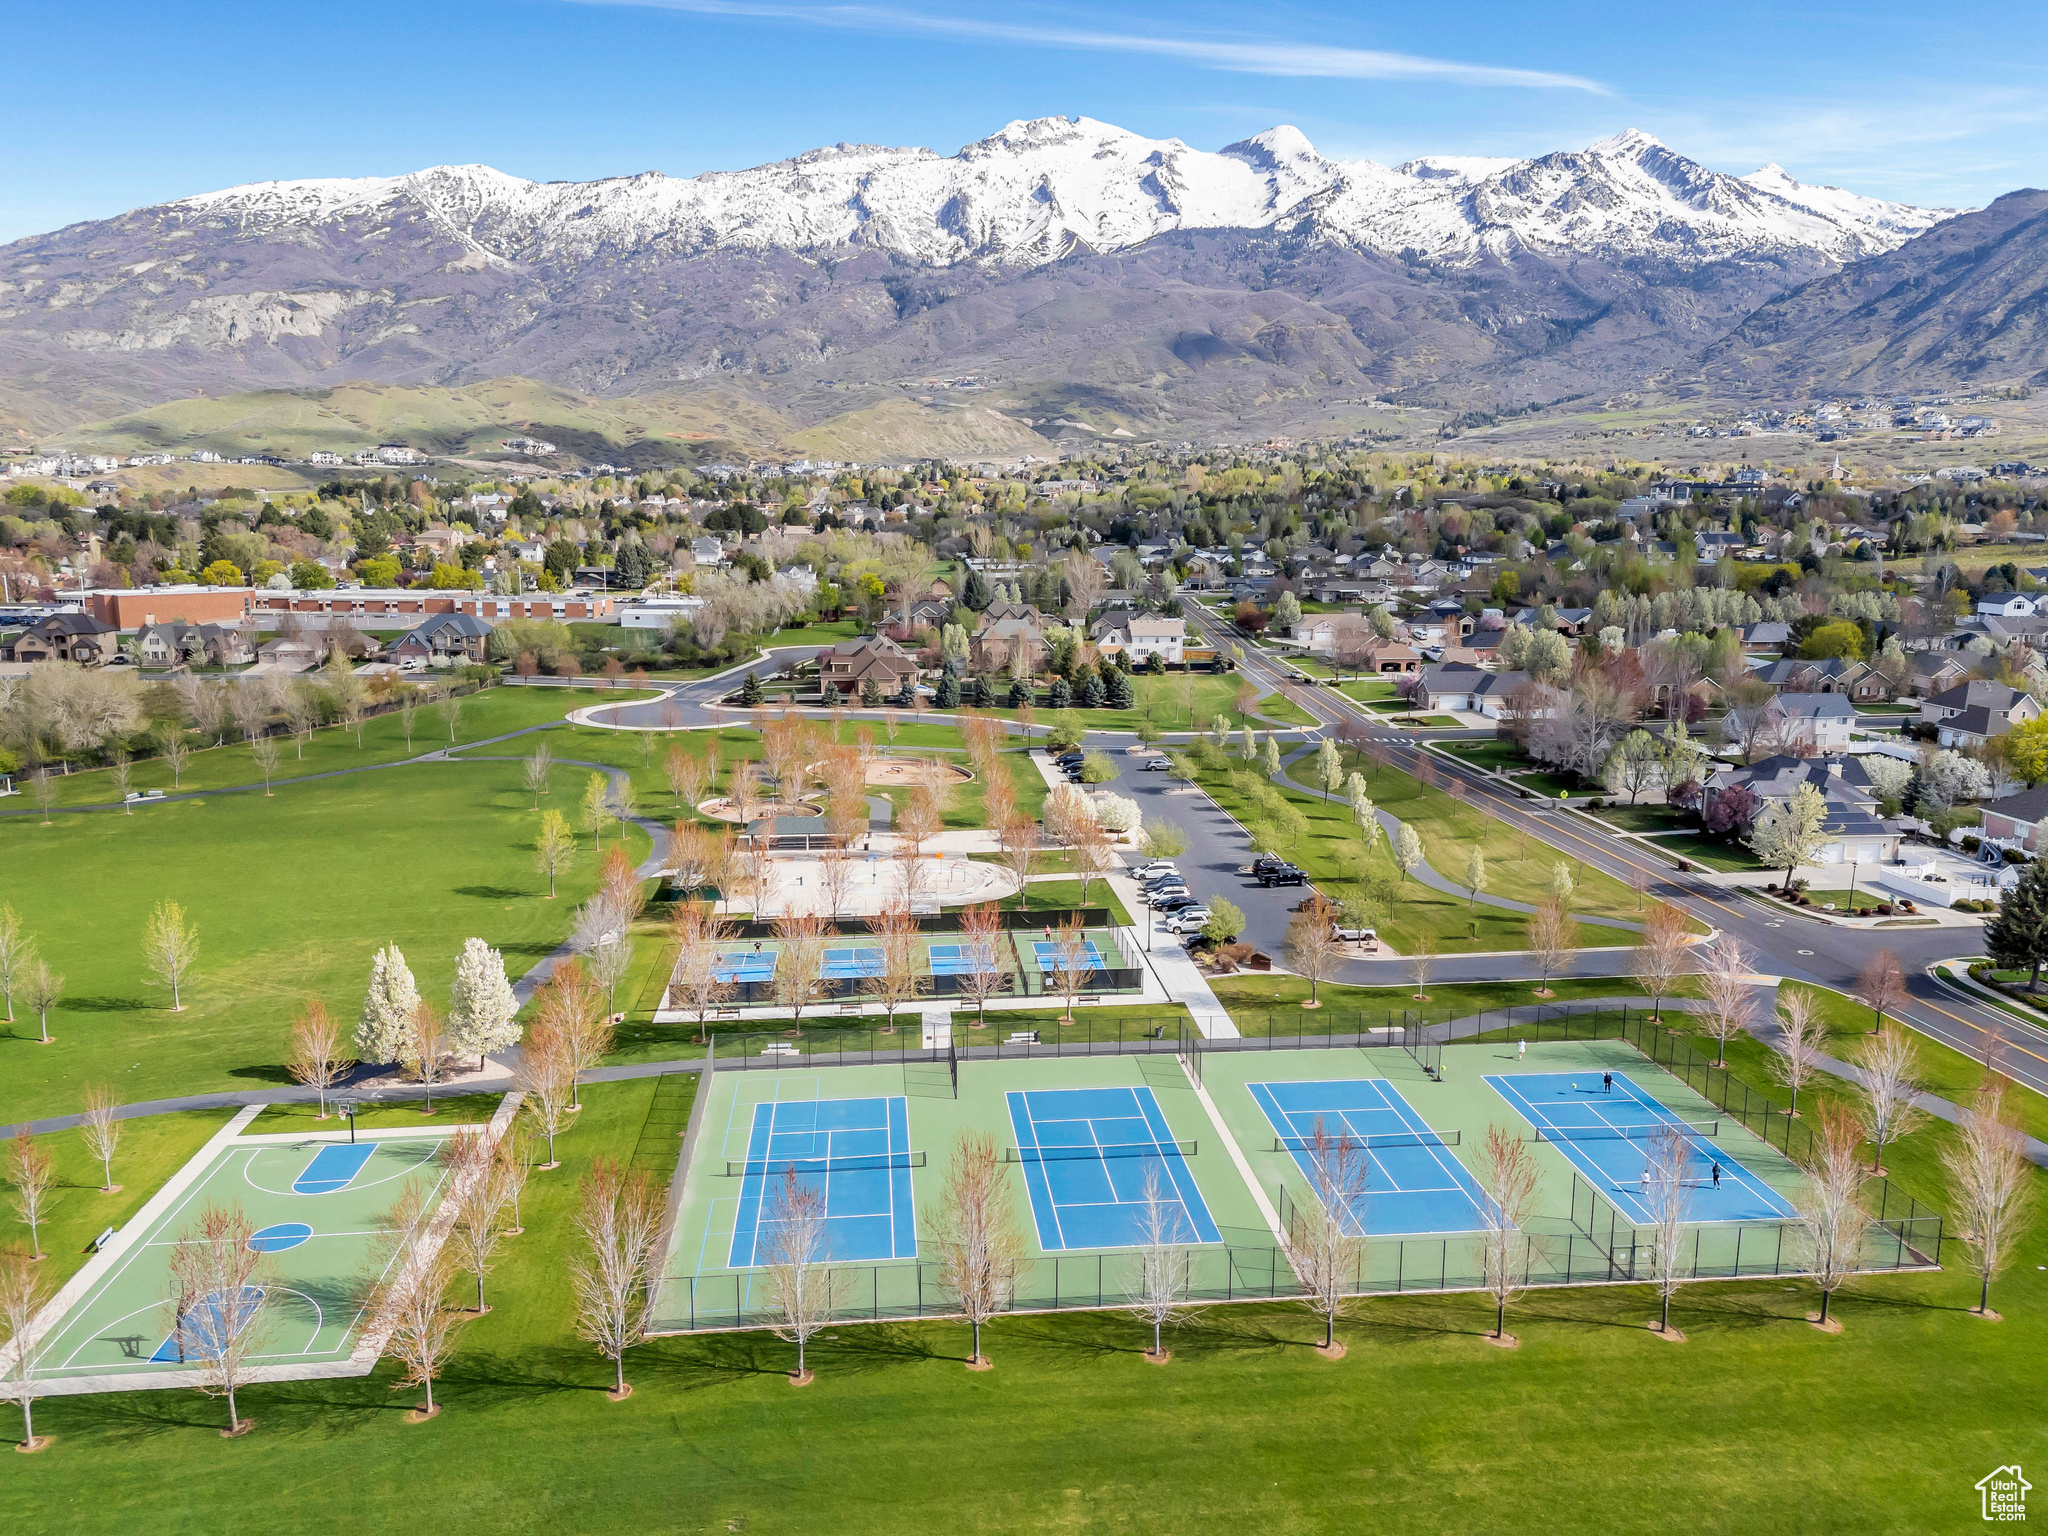 Over view of Tennis & Pickle Ball Courts